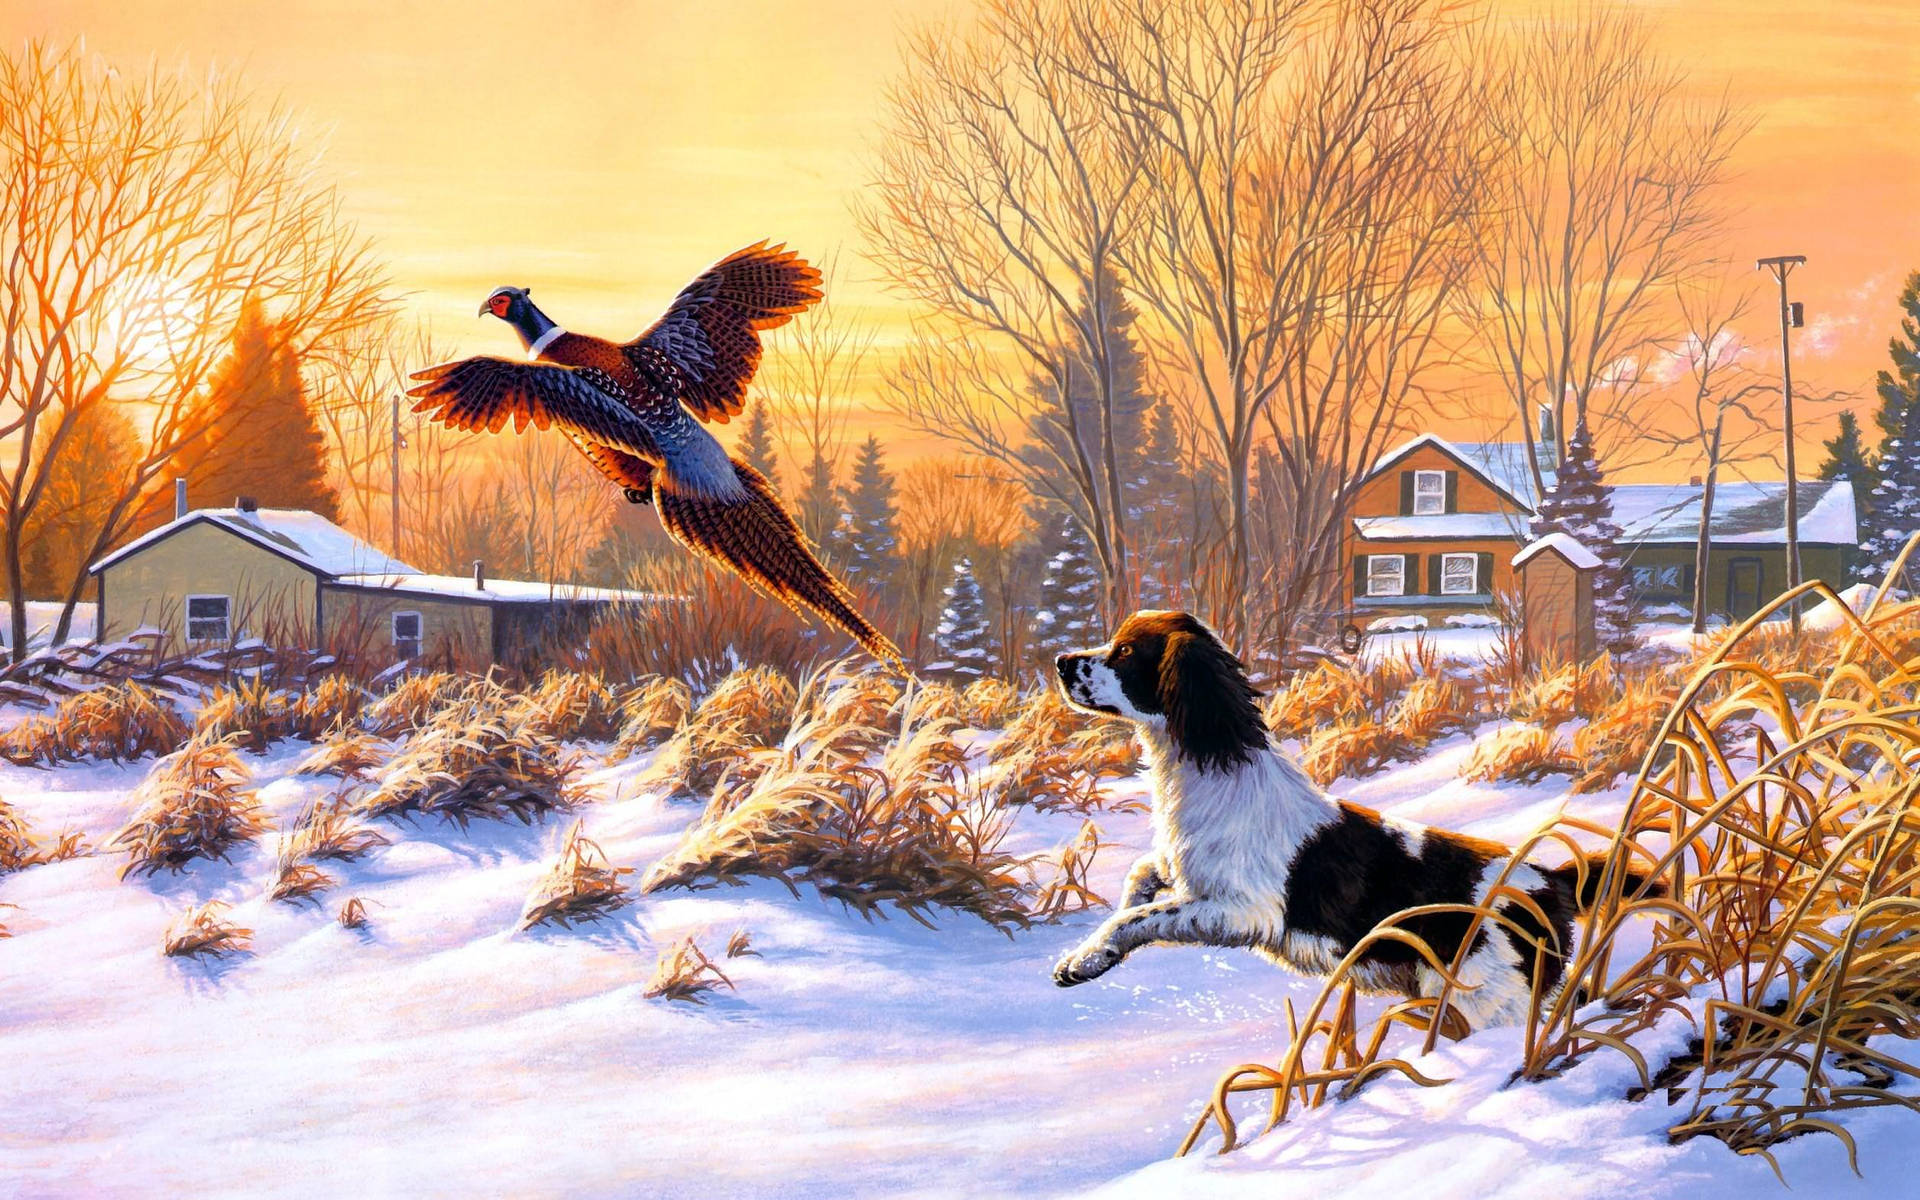 Hunting in Nature - Dog Chases After Wild Bird Wallpaper